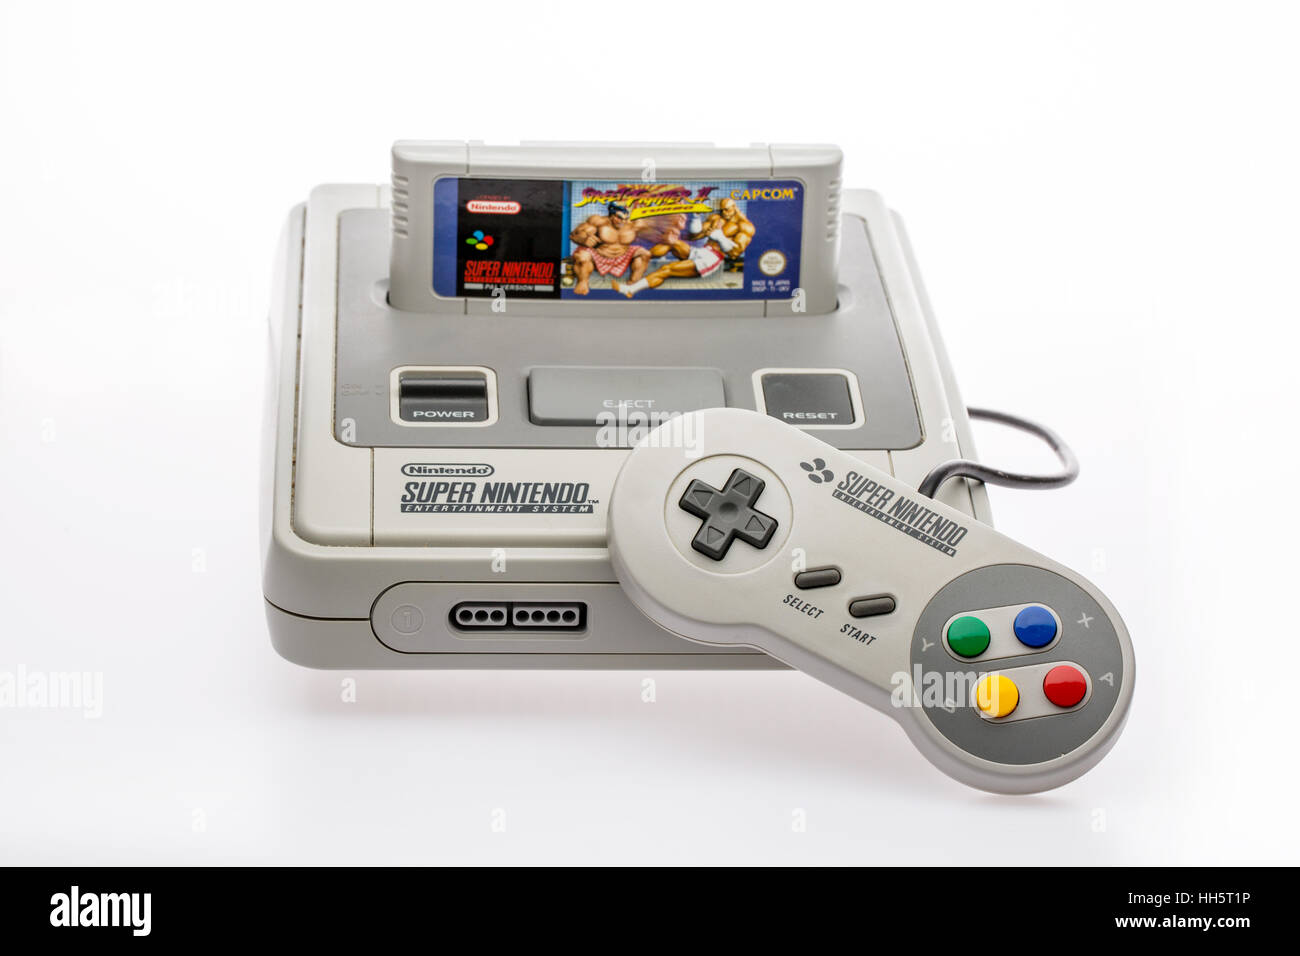 Super Nintendo Computer Game console from the 1990's Stock Photo